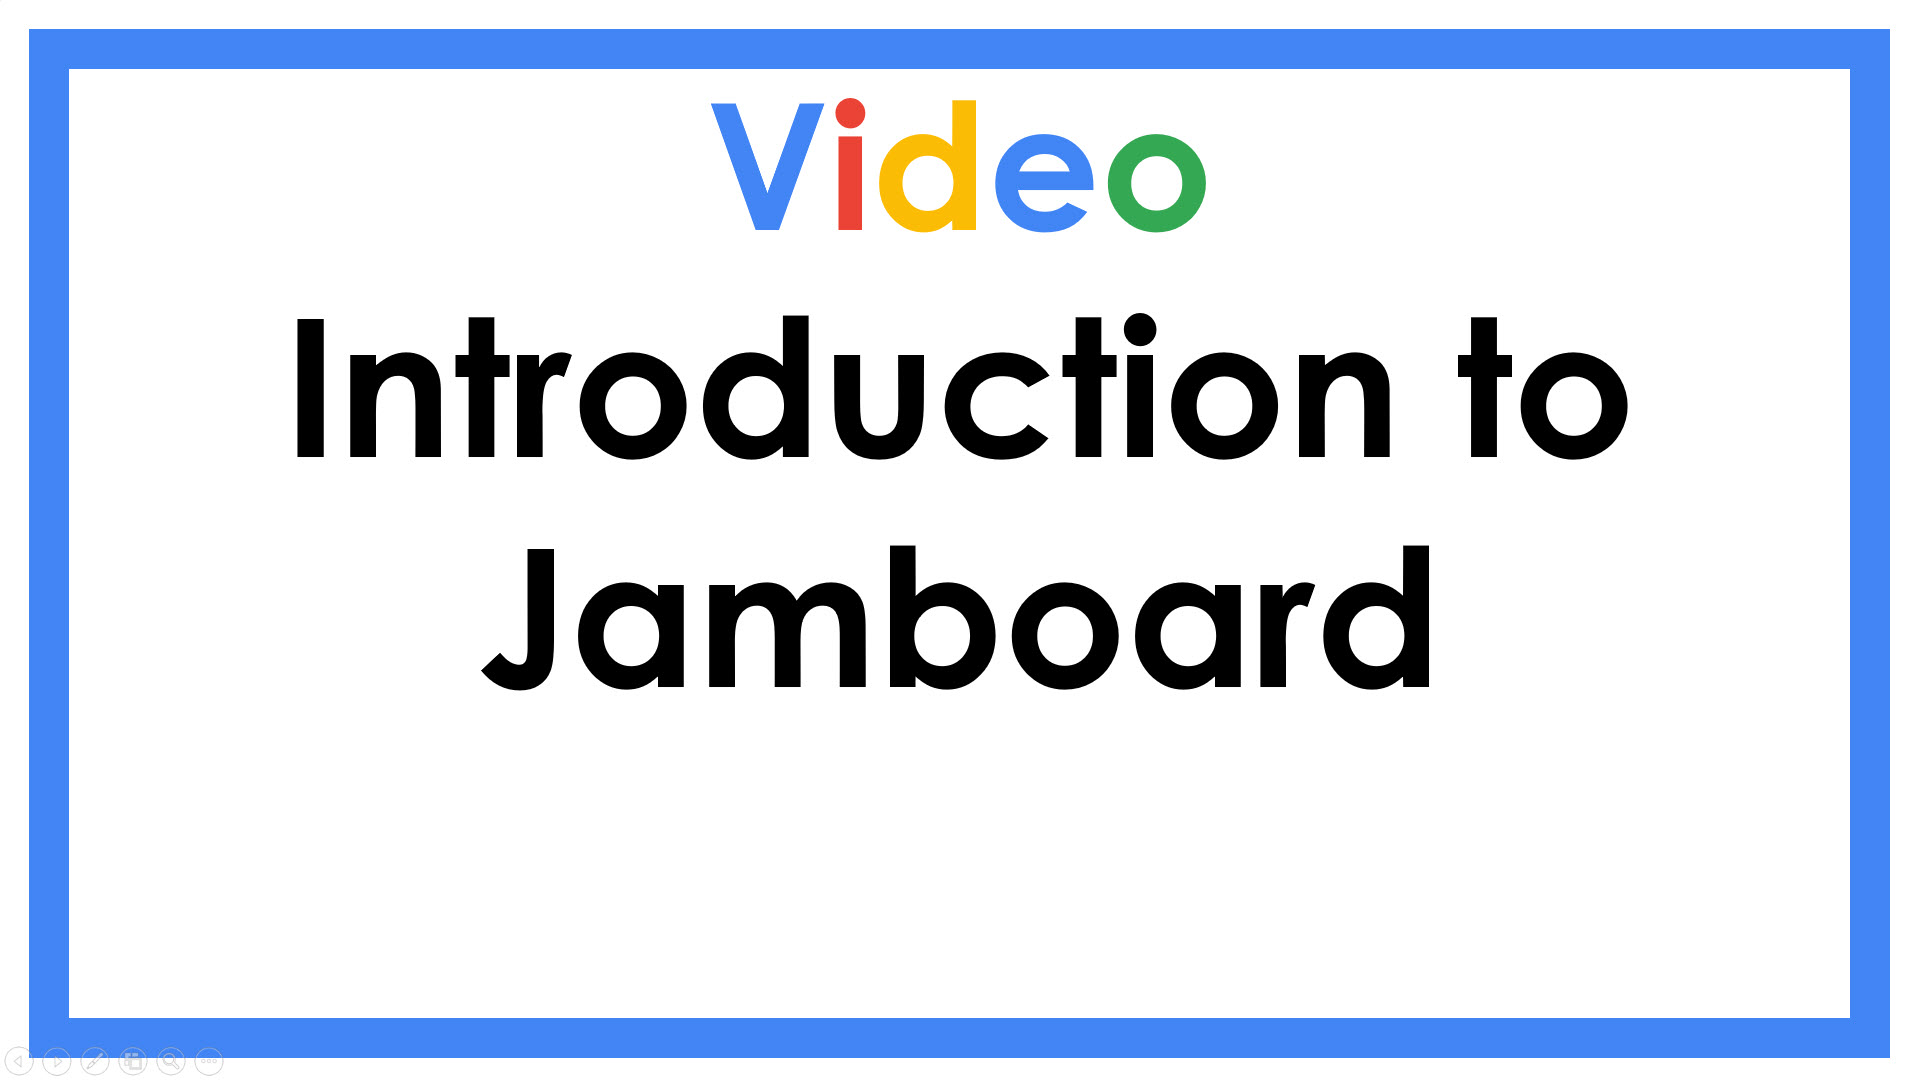 Introduction to Jamboard